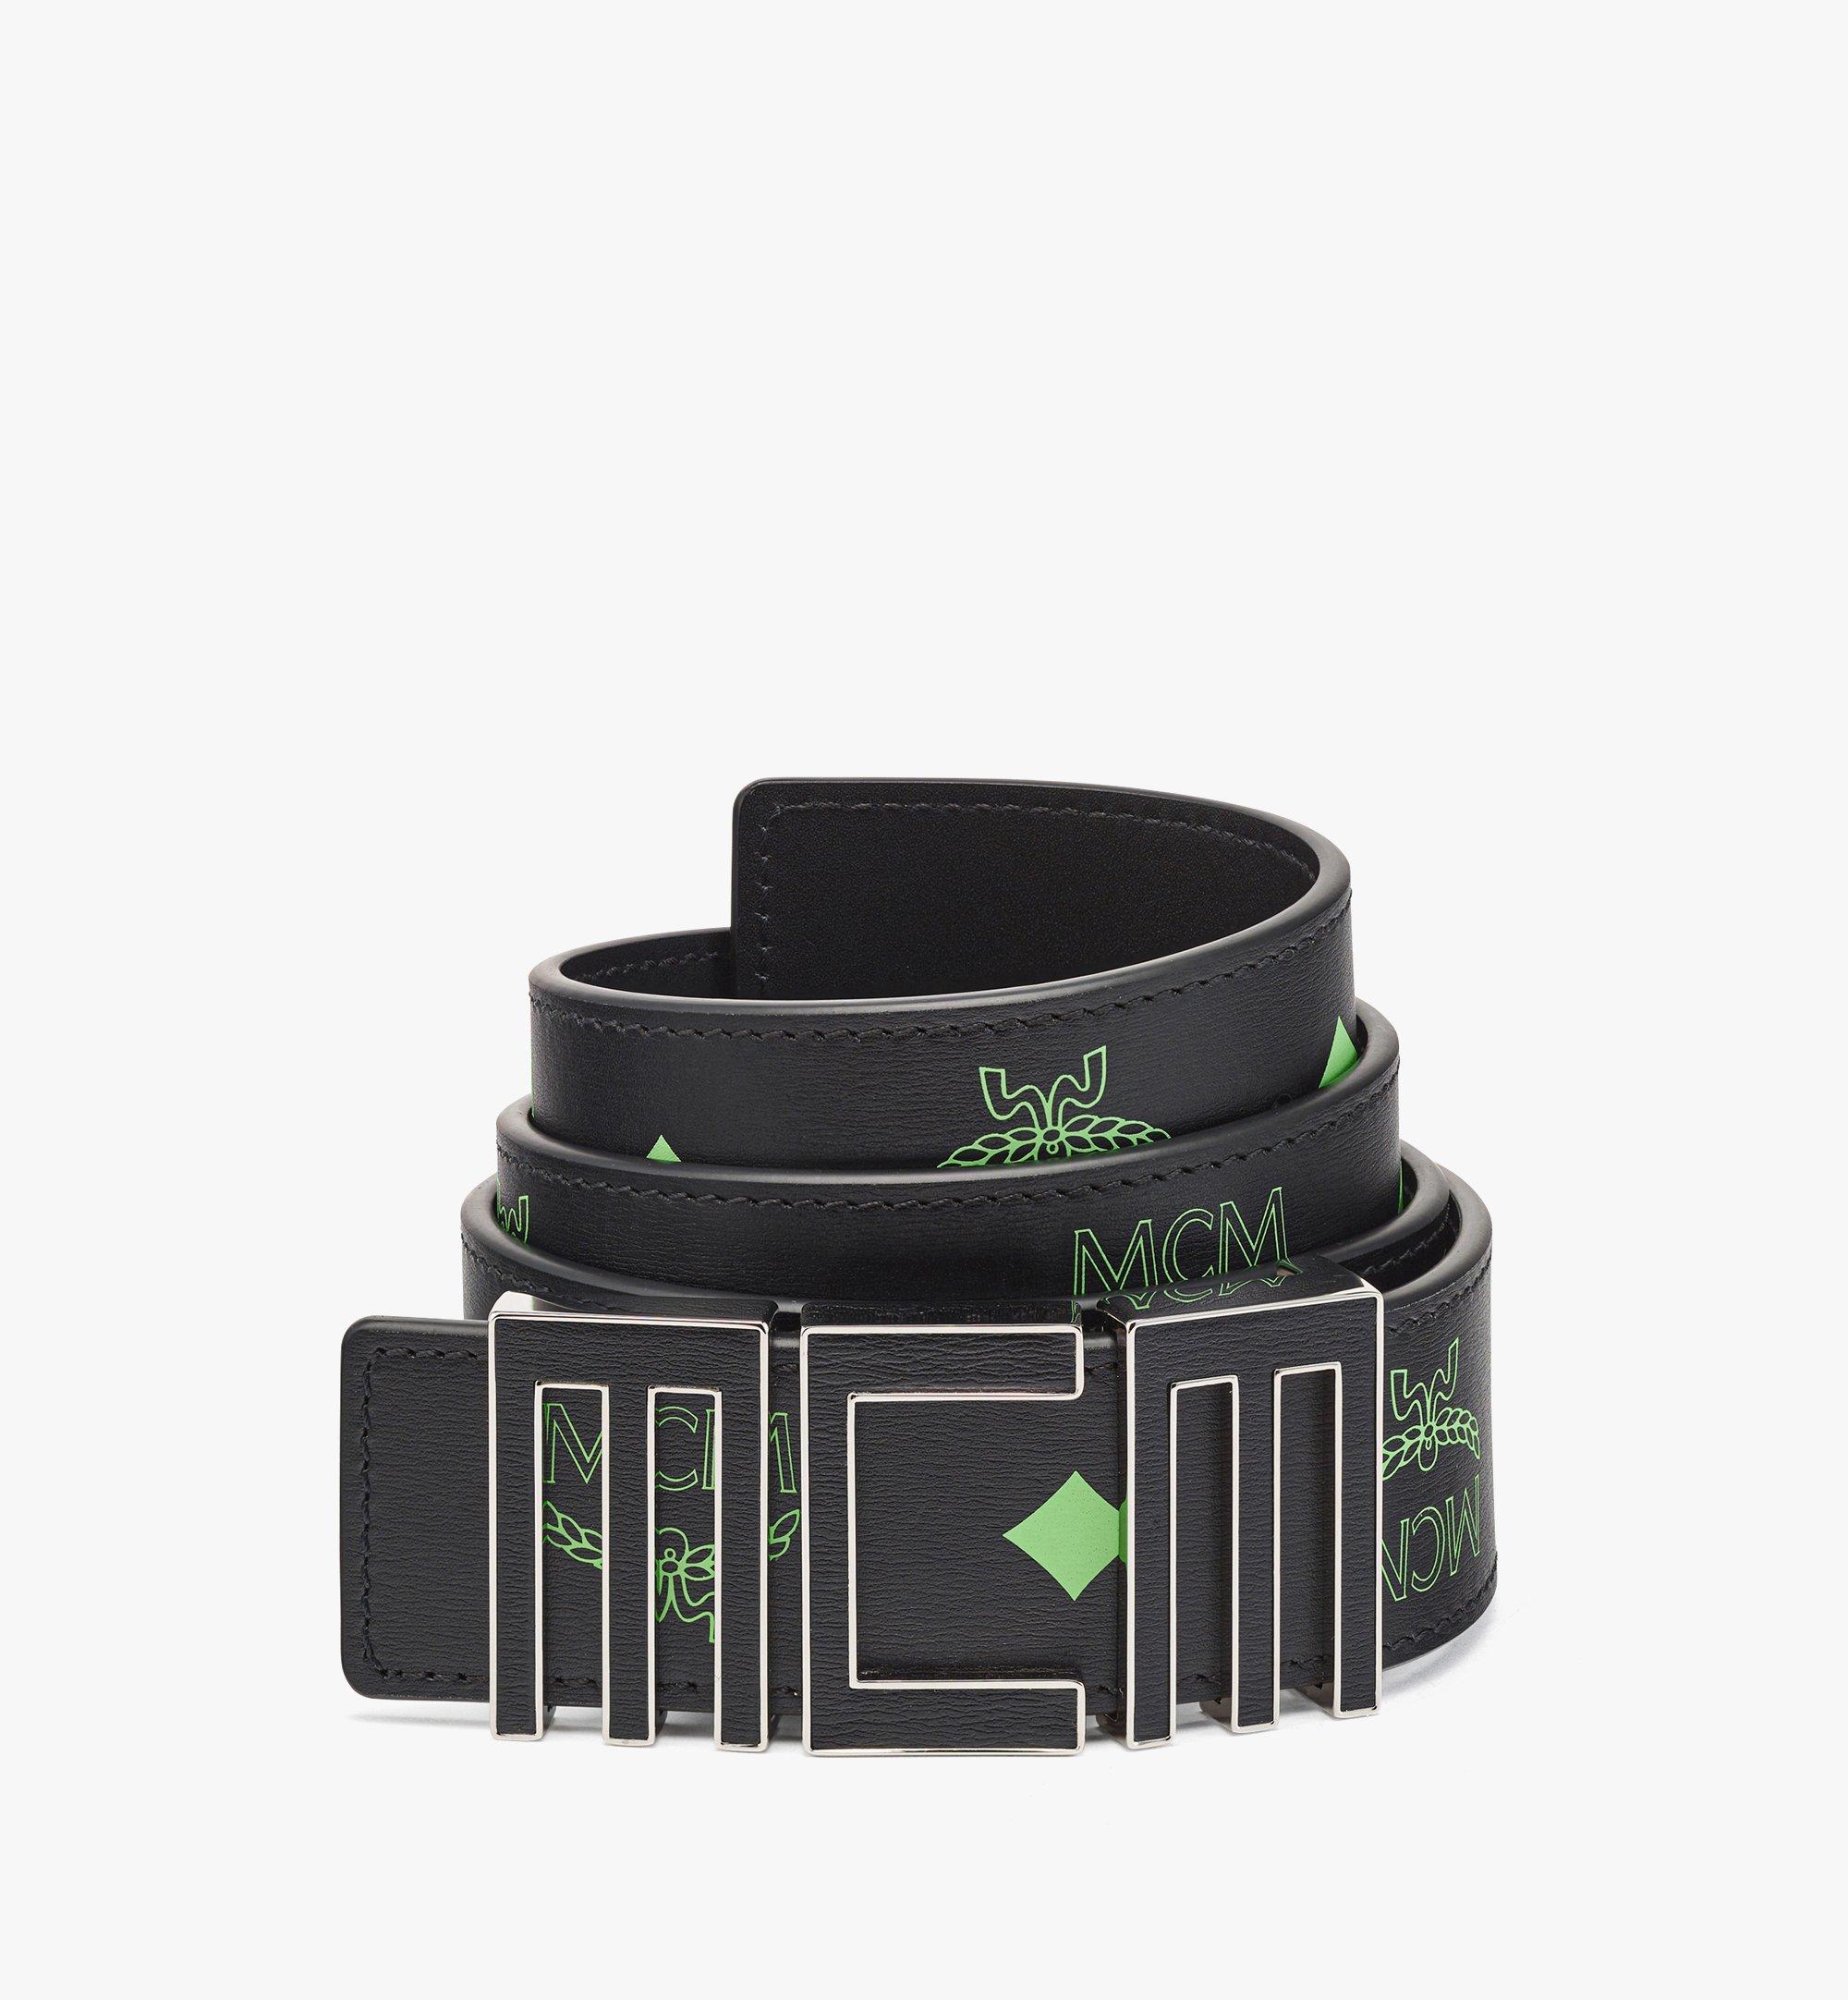 MCM Leather Inlay Tech MCM Belt 1.5” in Embossed Leather Green MXBCSTC03JW100 Alternate View 1